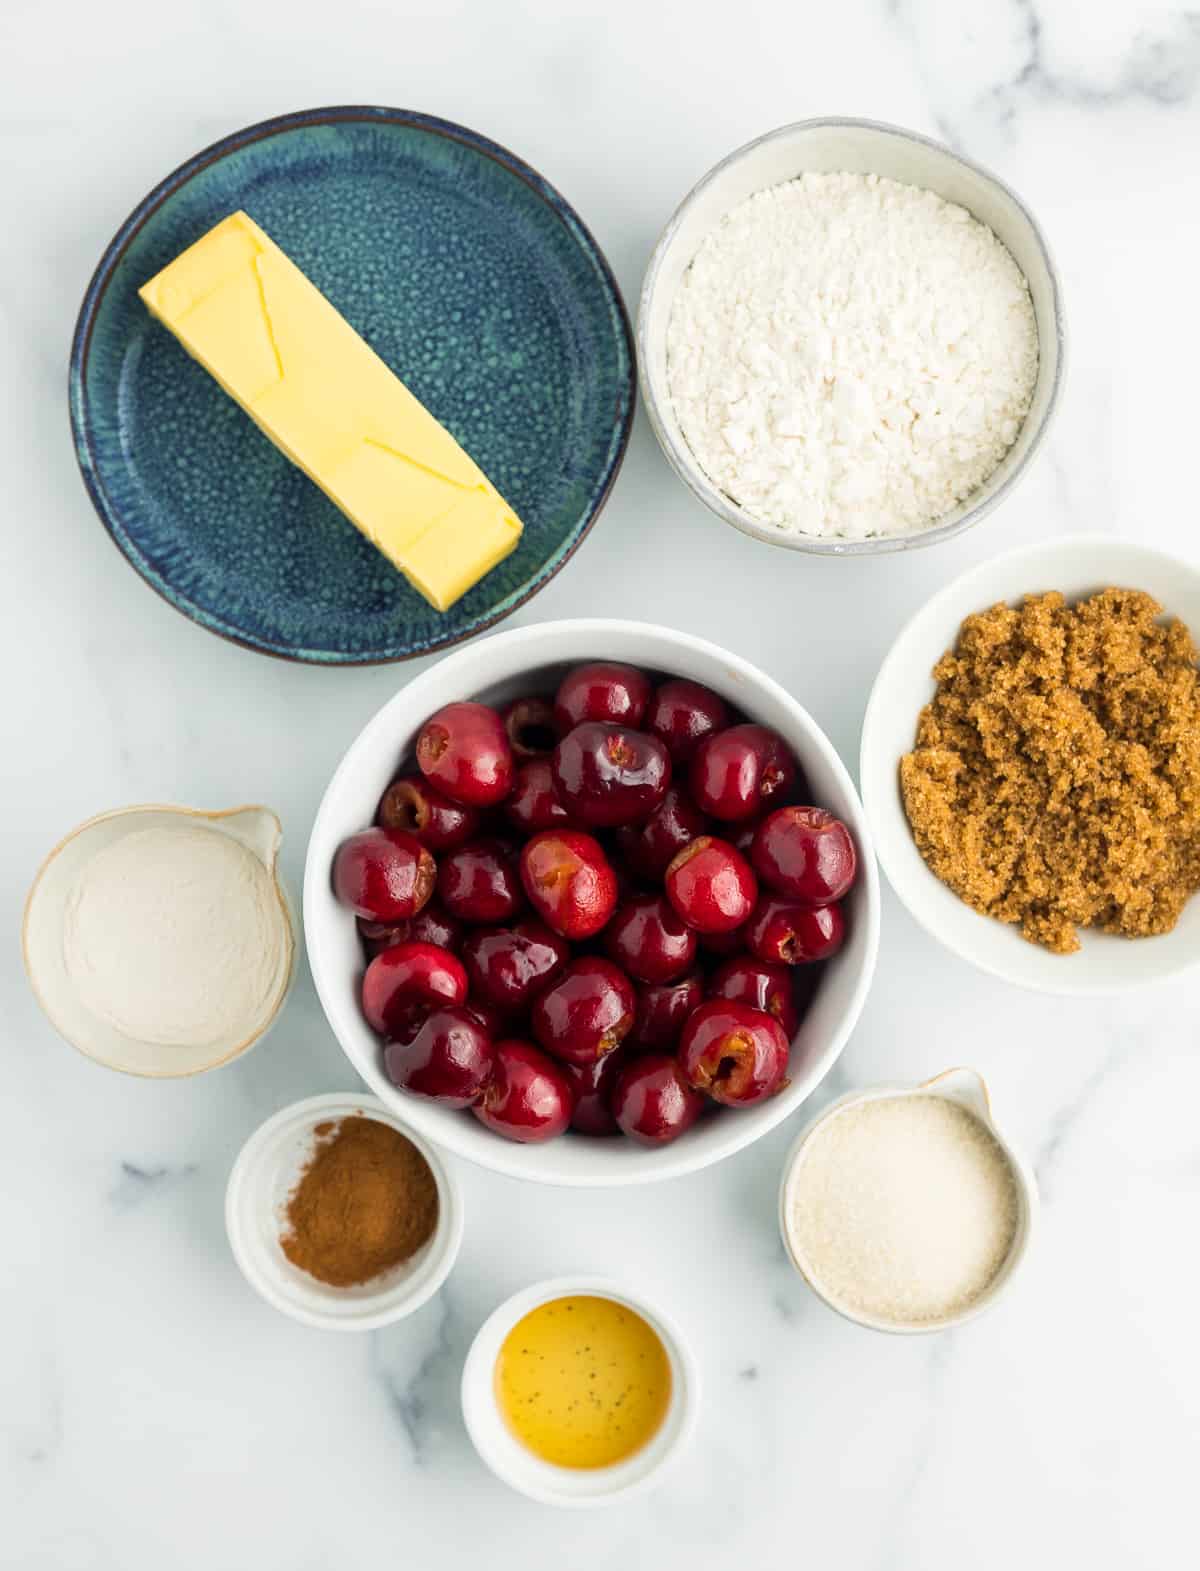 a plate of butter, a bowl of cherries, flour, sugar, and other ingredients on a marbled board.